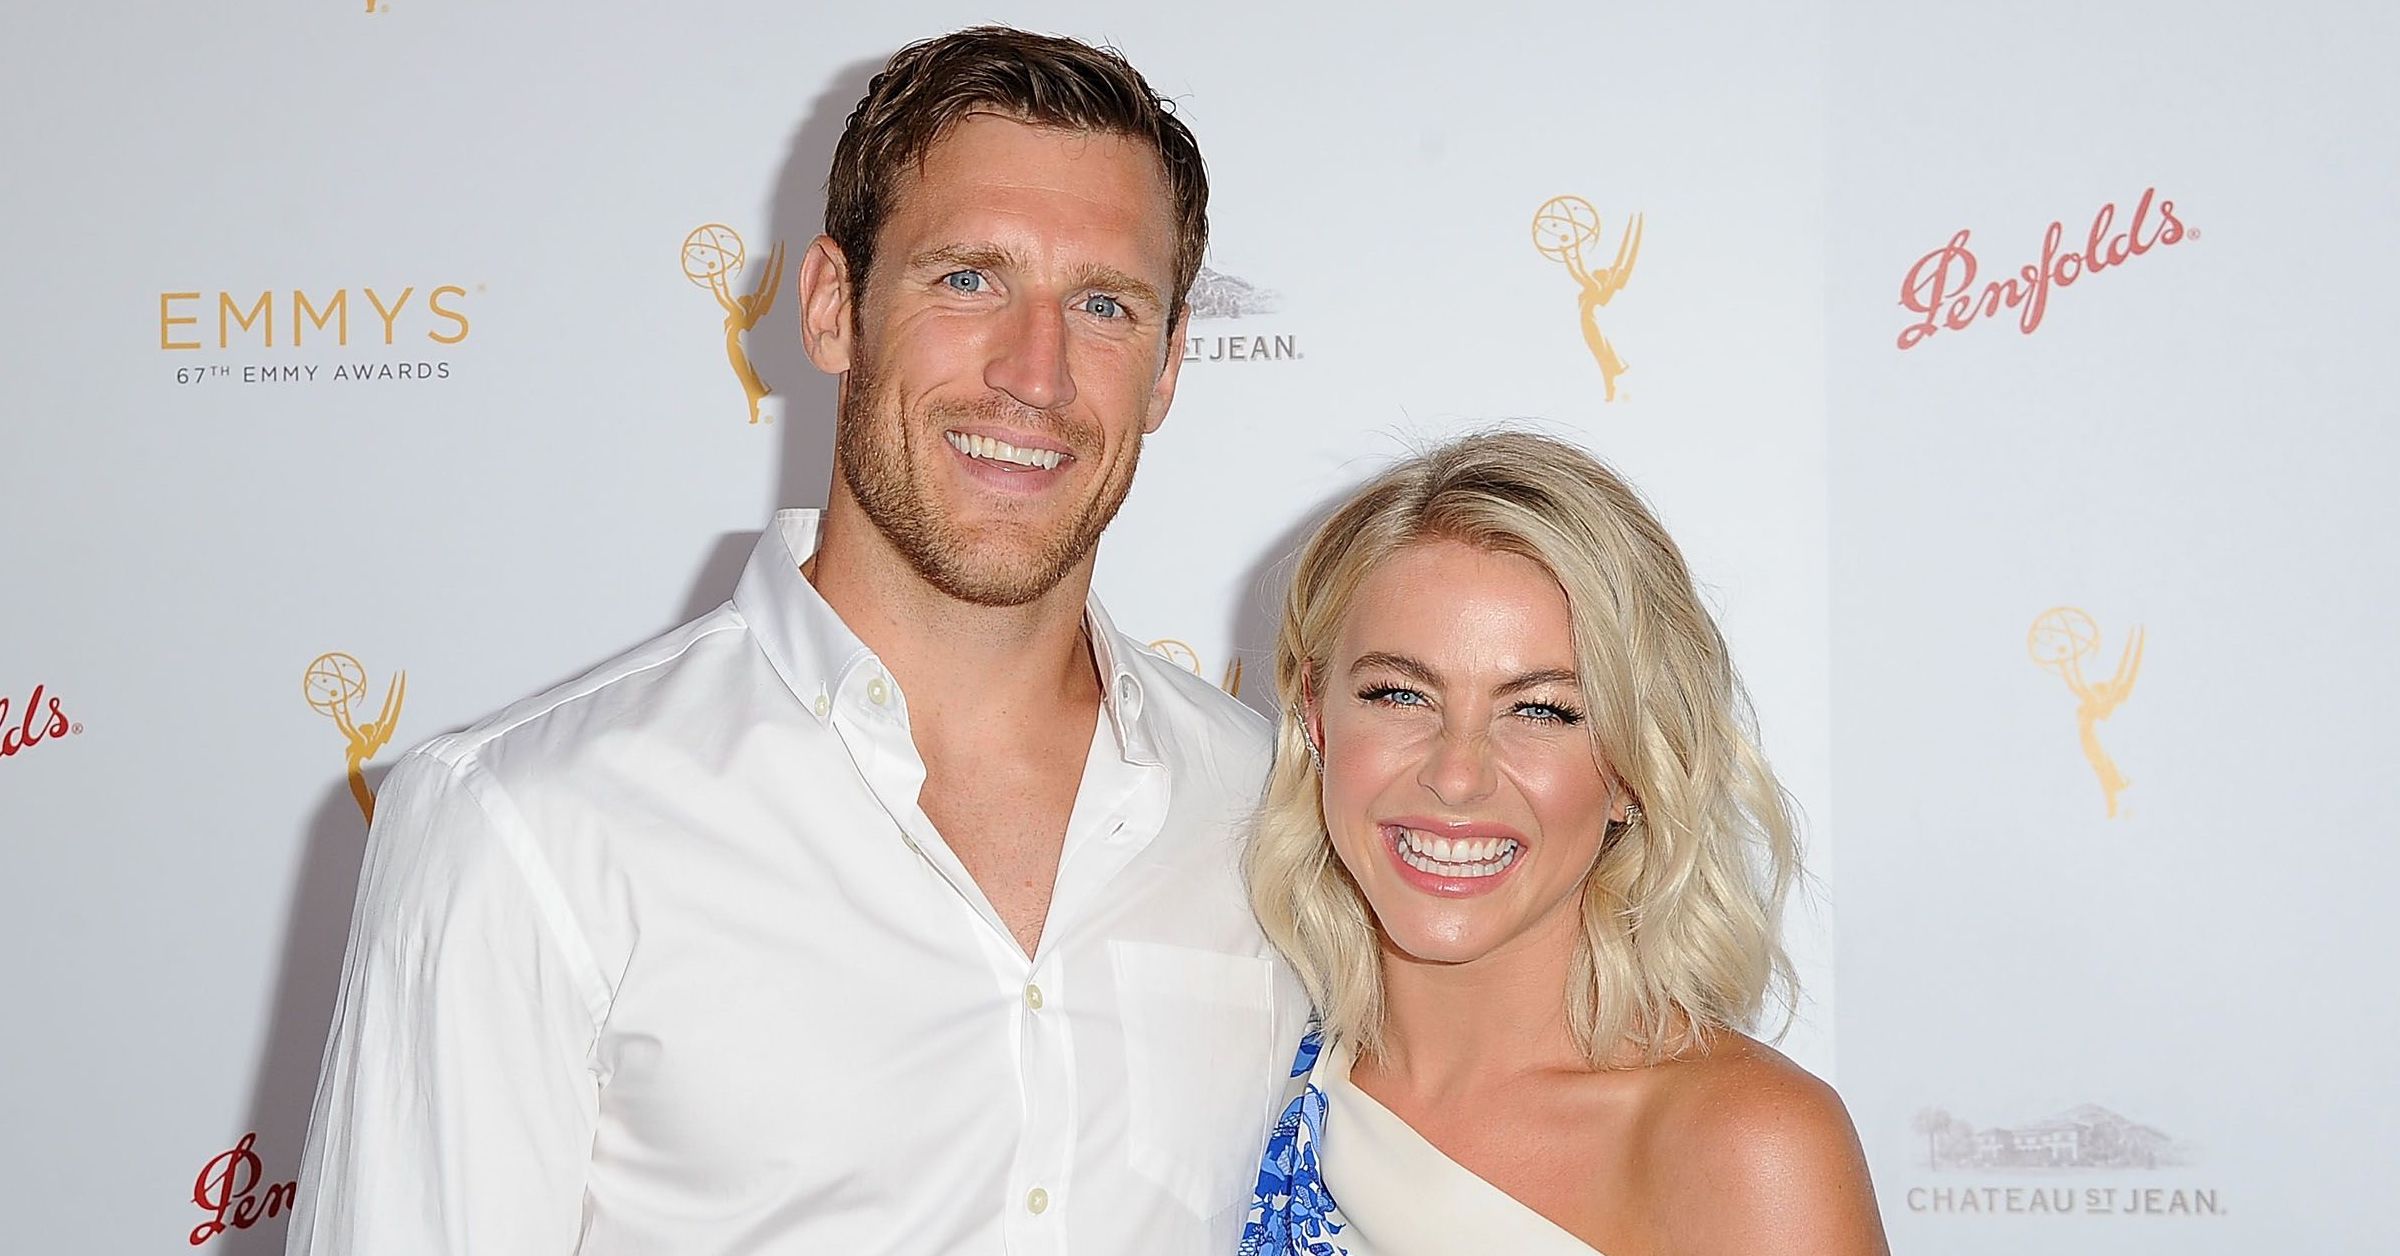 Julianne Hough Shares Message About The Evolution Of Love Amid Brooks Laich Breakup Rumors2400 x 1256